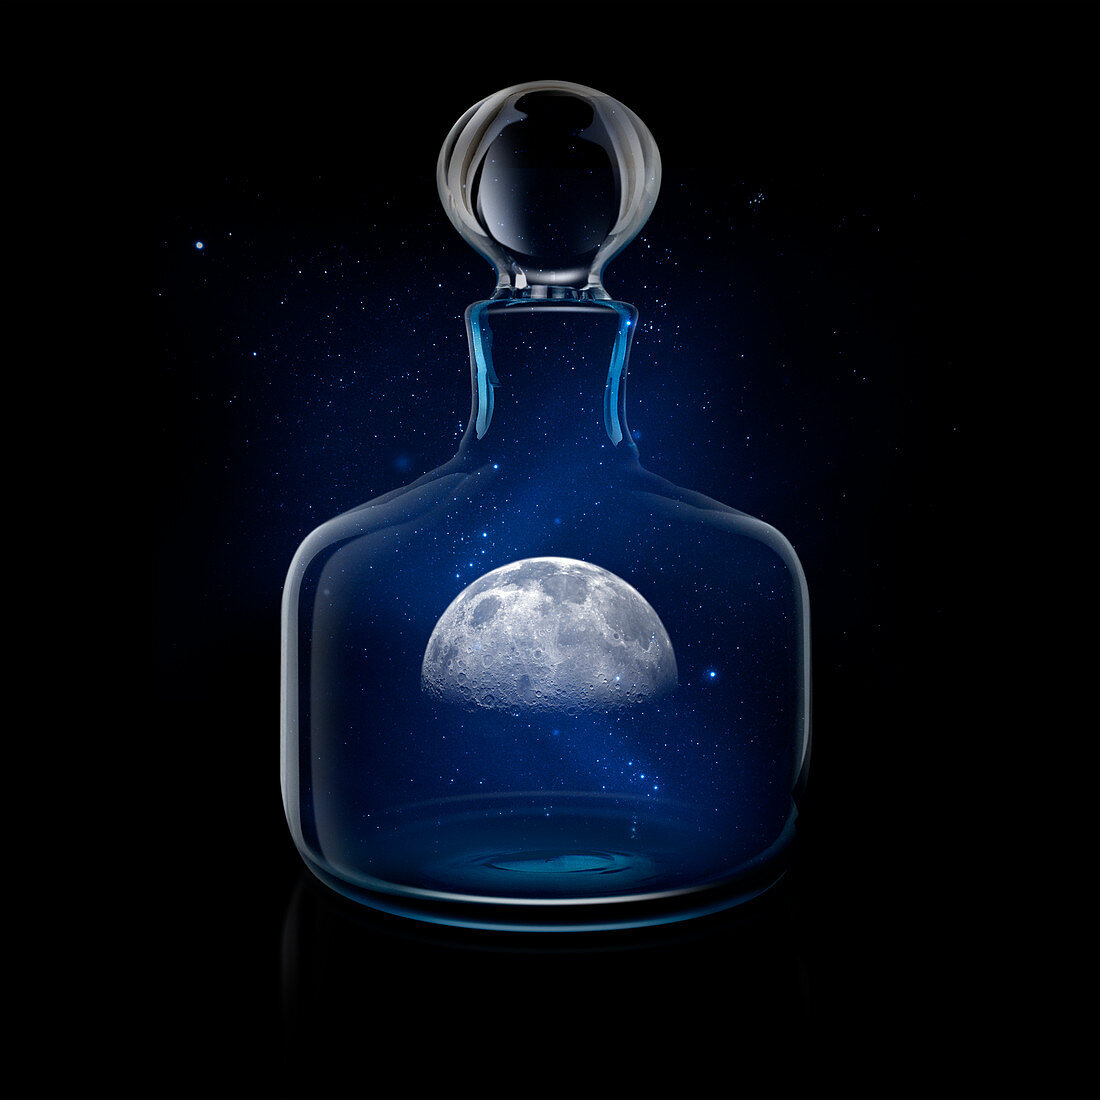 Mysterious moon in glass decanter against night sky